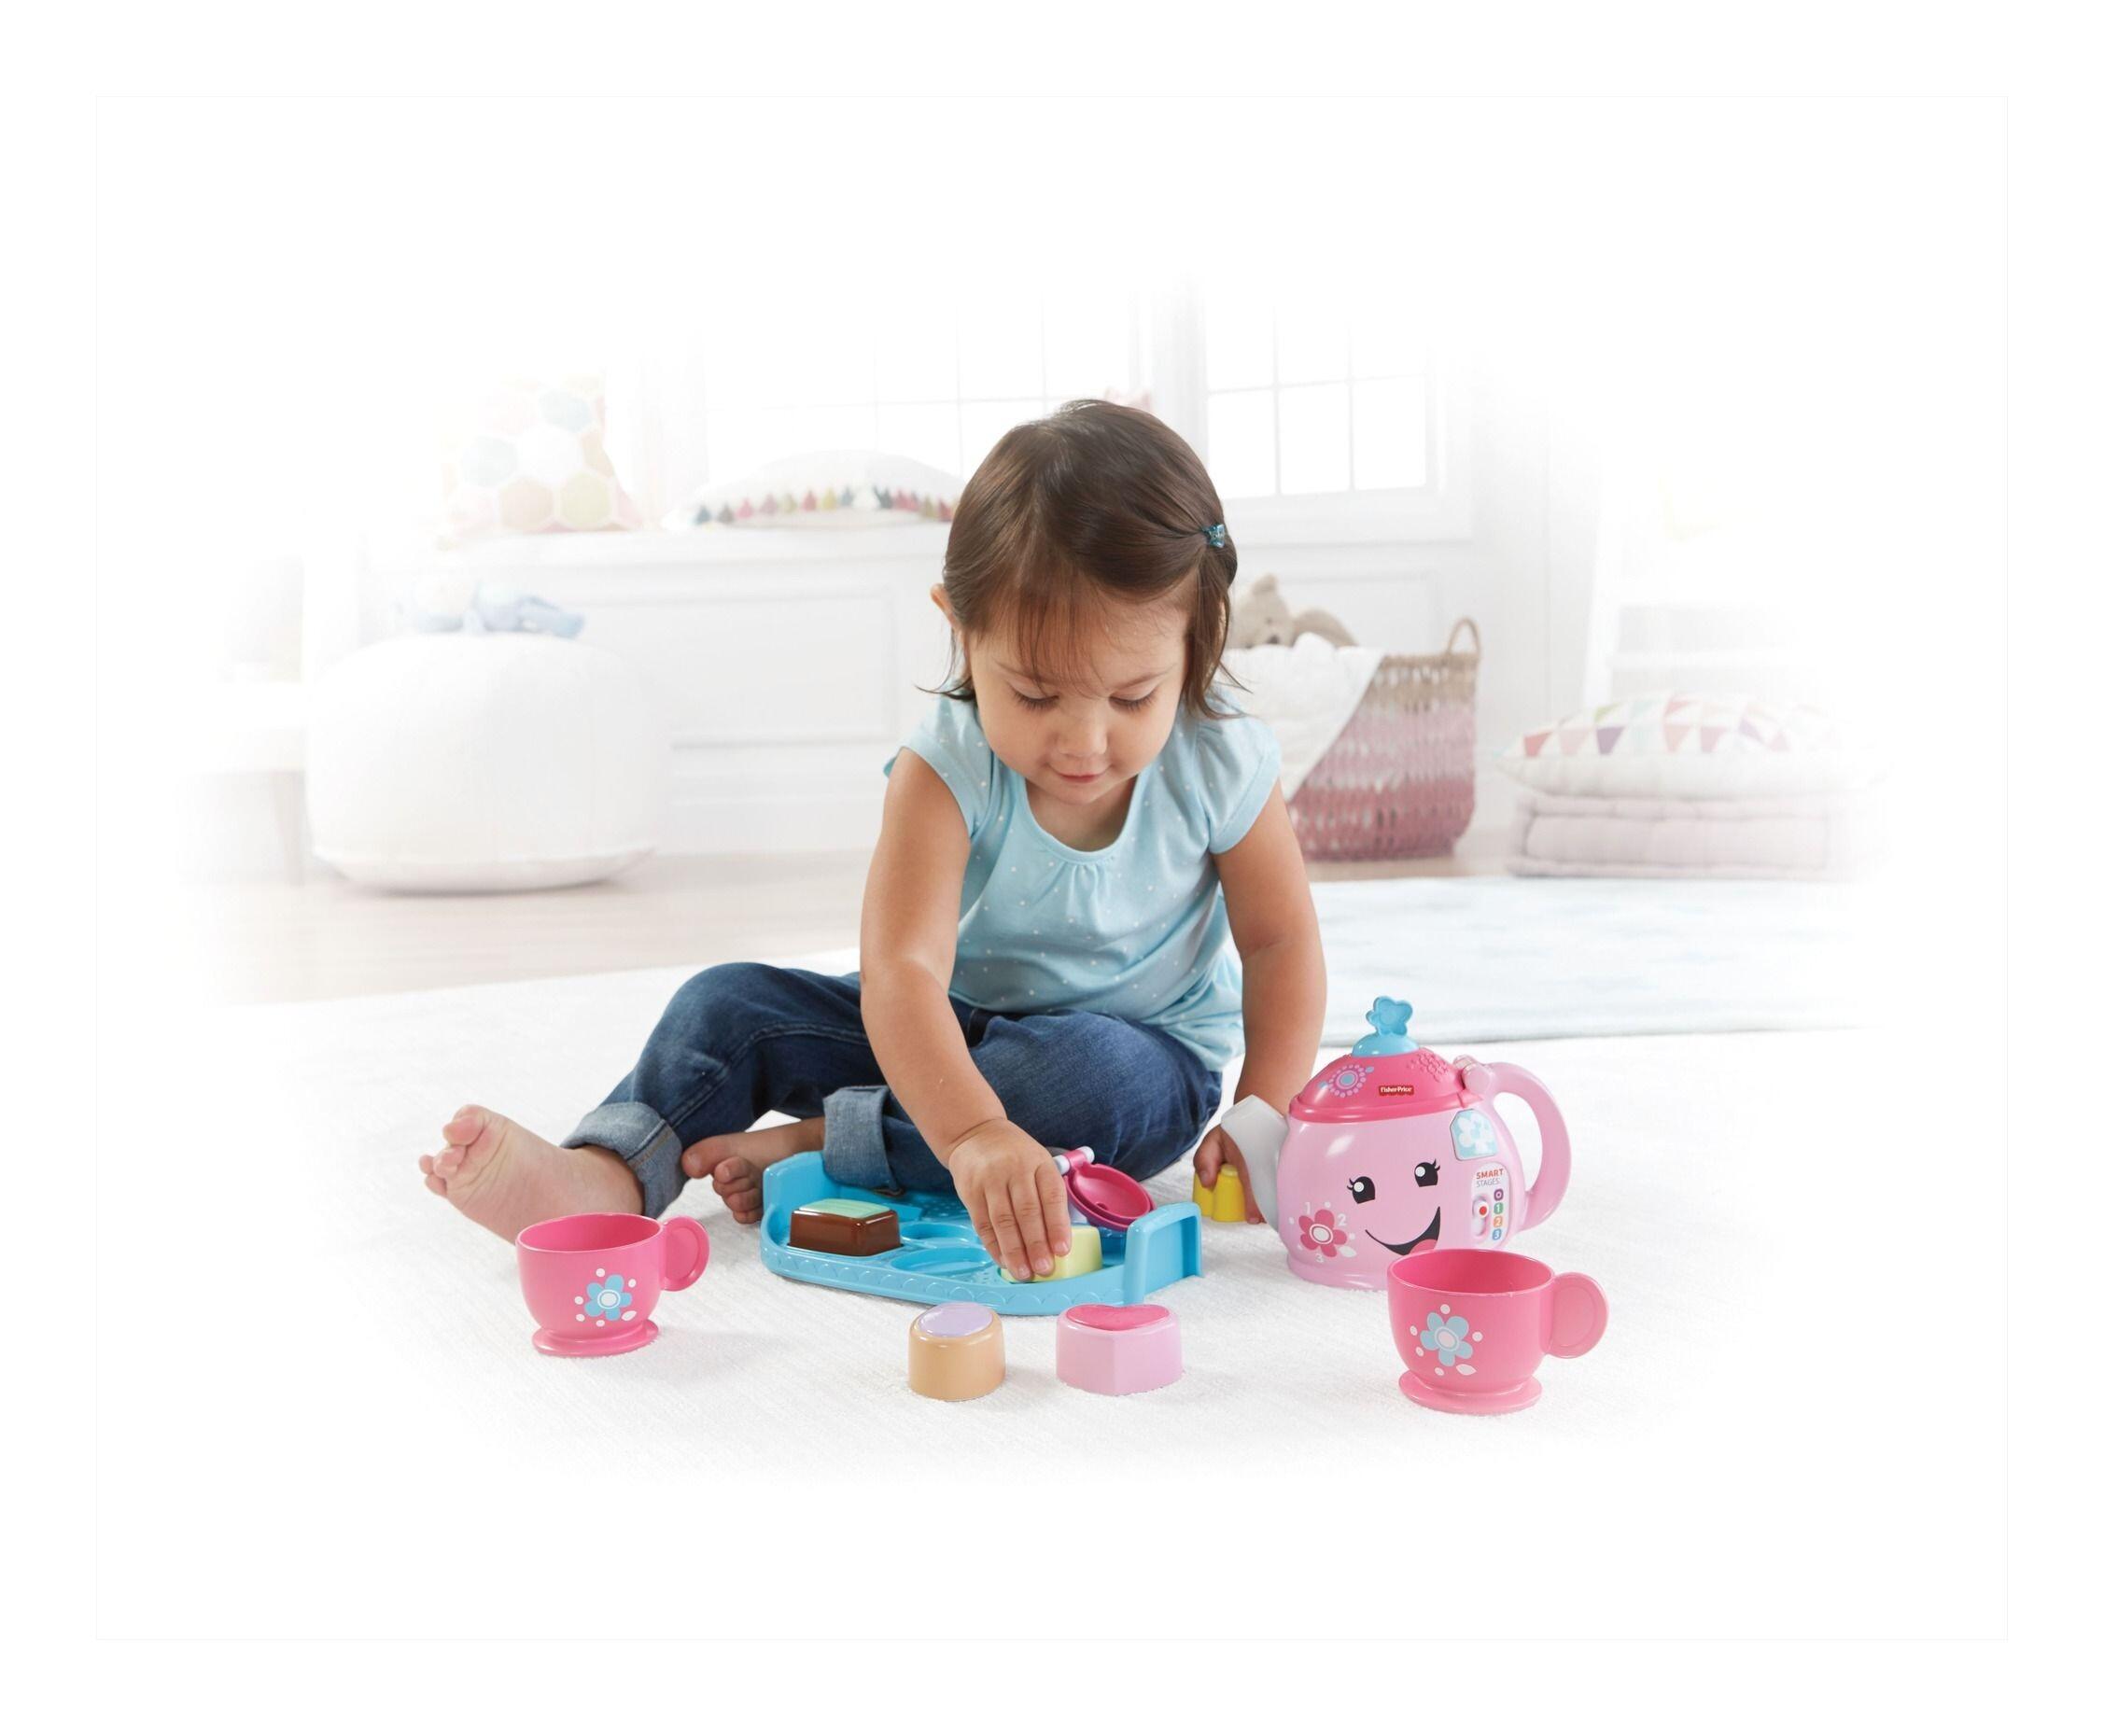 Fisher Price Laugh & Learn Smart Stages Toddler Tea Set